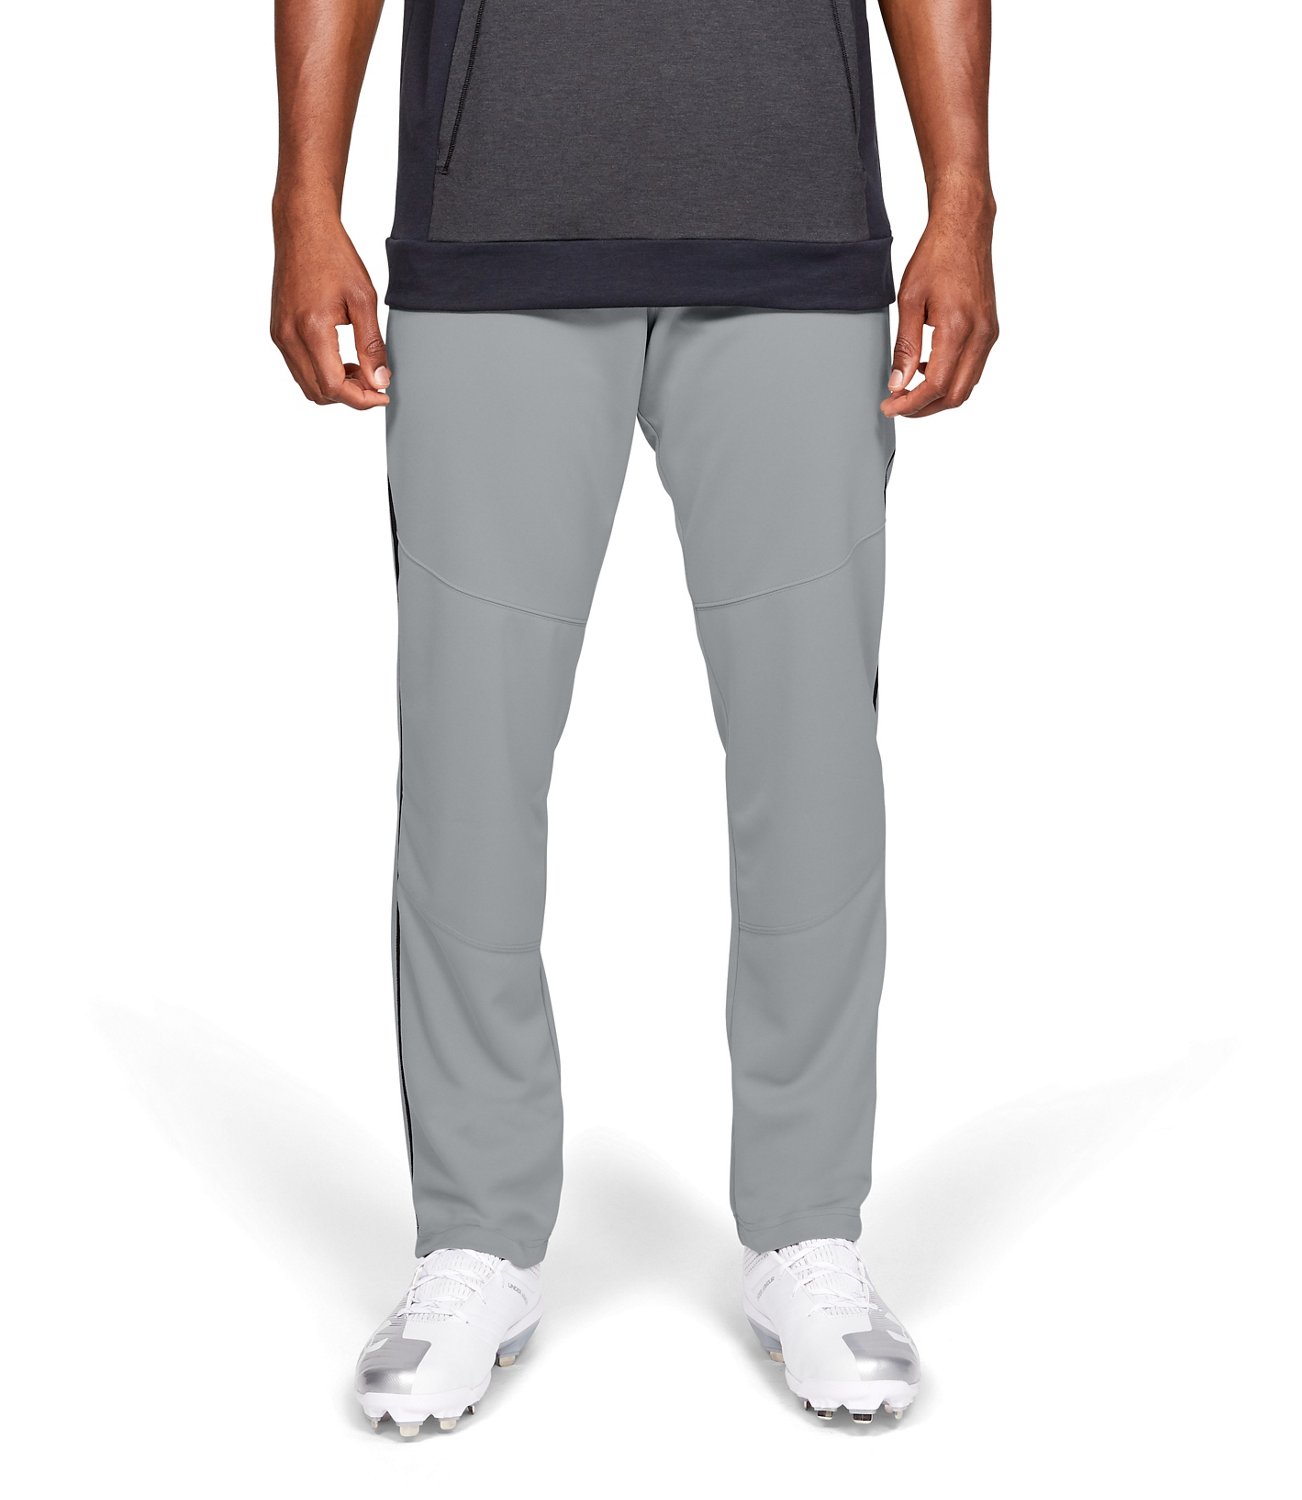 Under Armour Men's Utility Relaxed Piped Baseball Pants